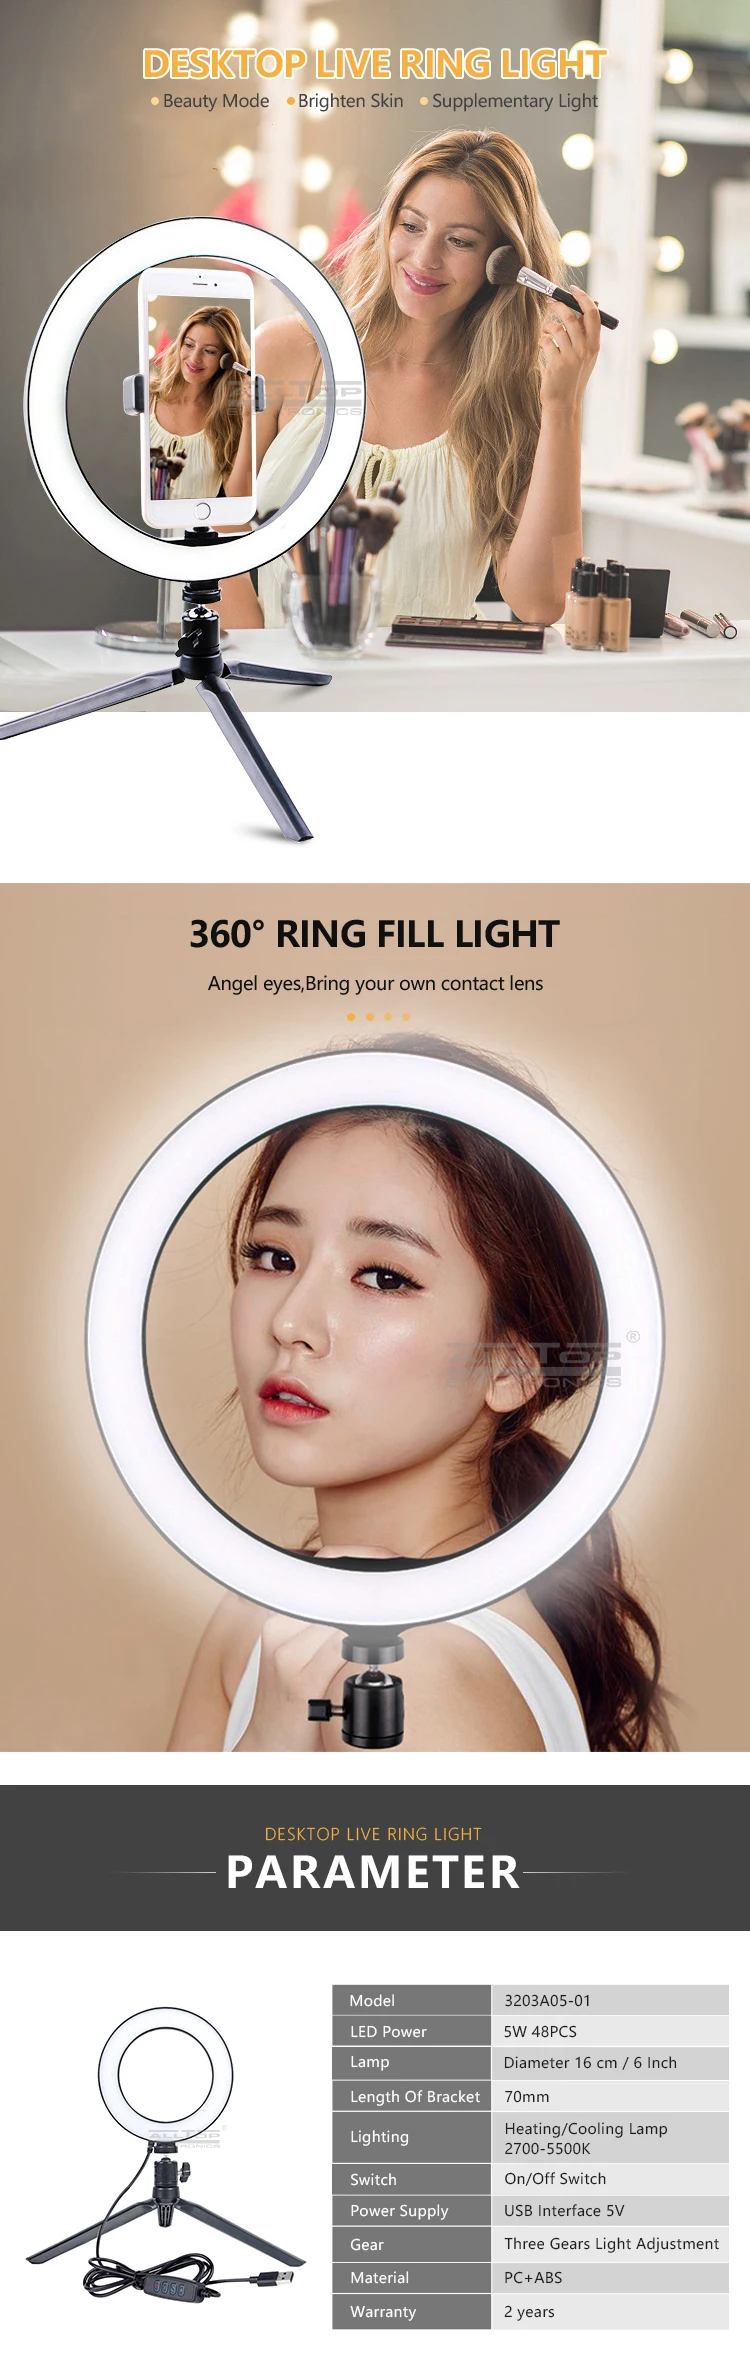 Led camera light selfie Mobile phone stents 2835 LED 120PCS PC ABS Dimmable light ring